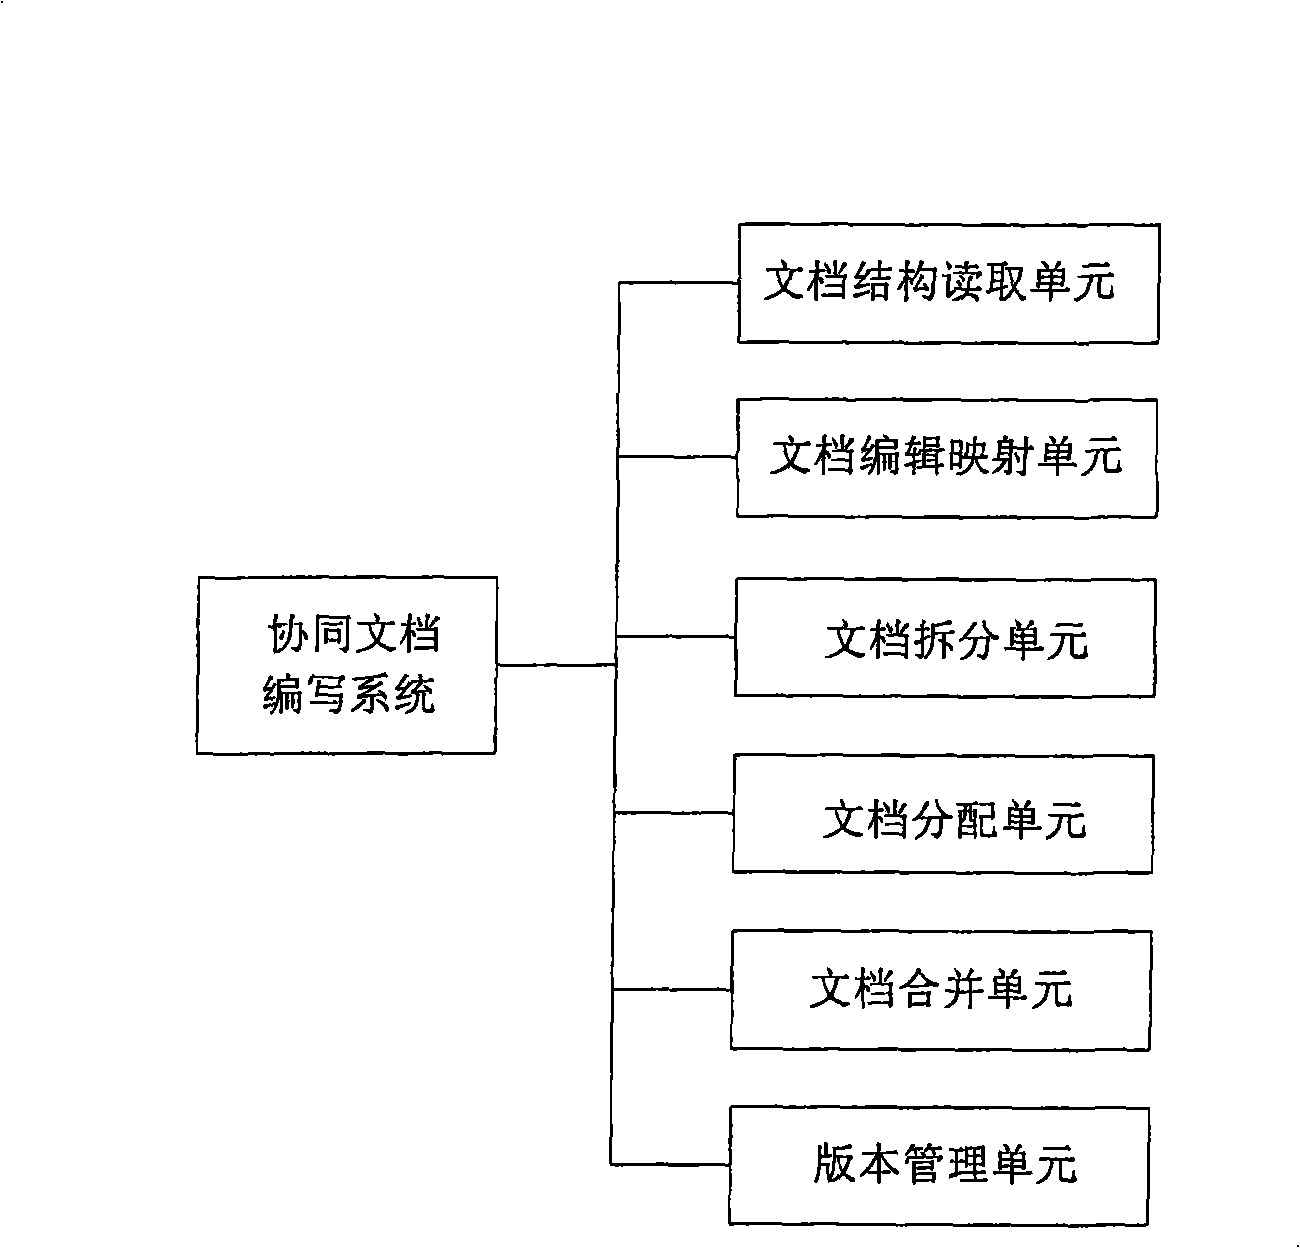 System for writing and compiling cooperated documents